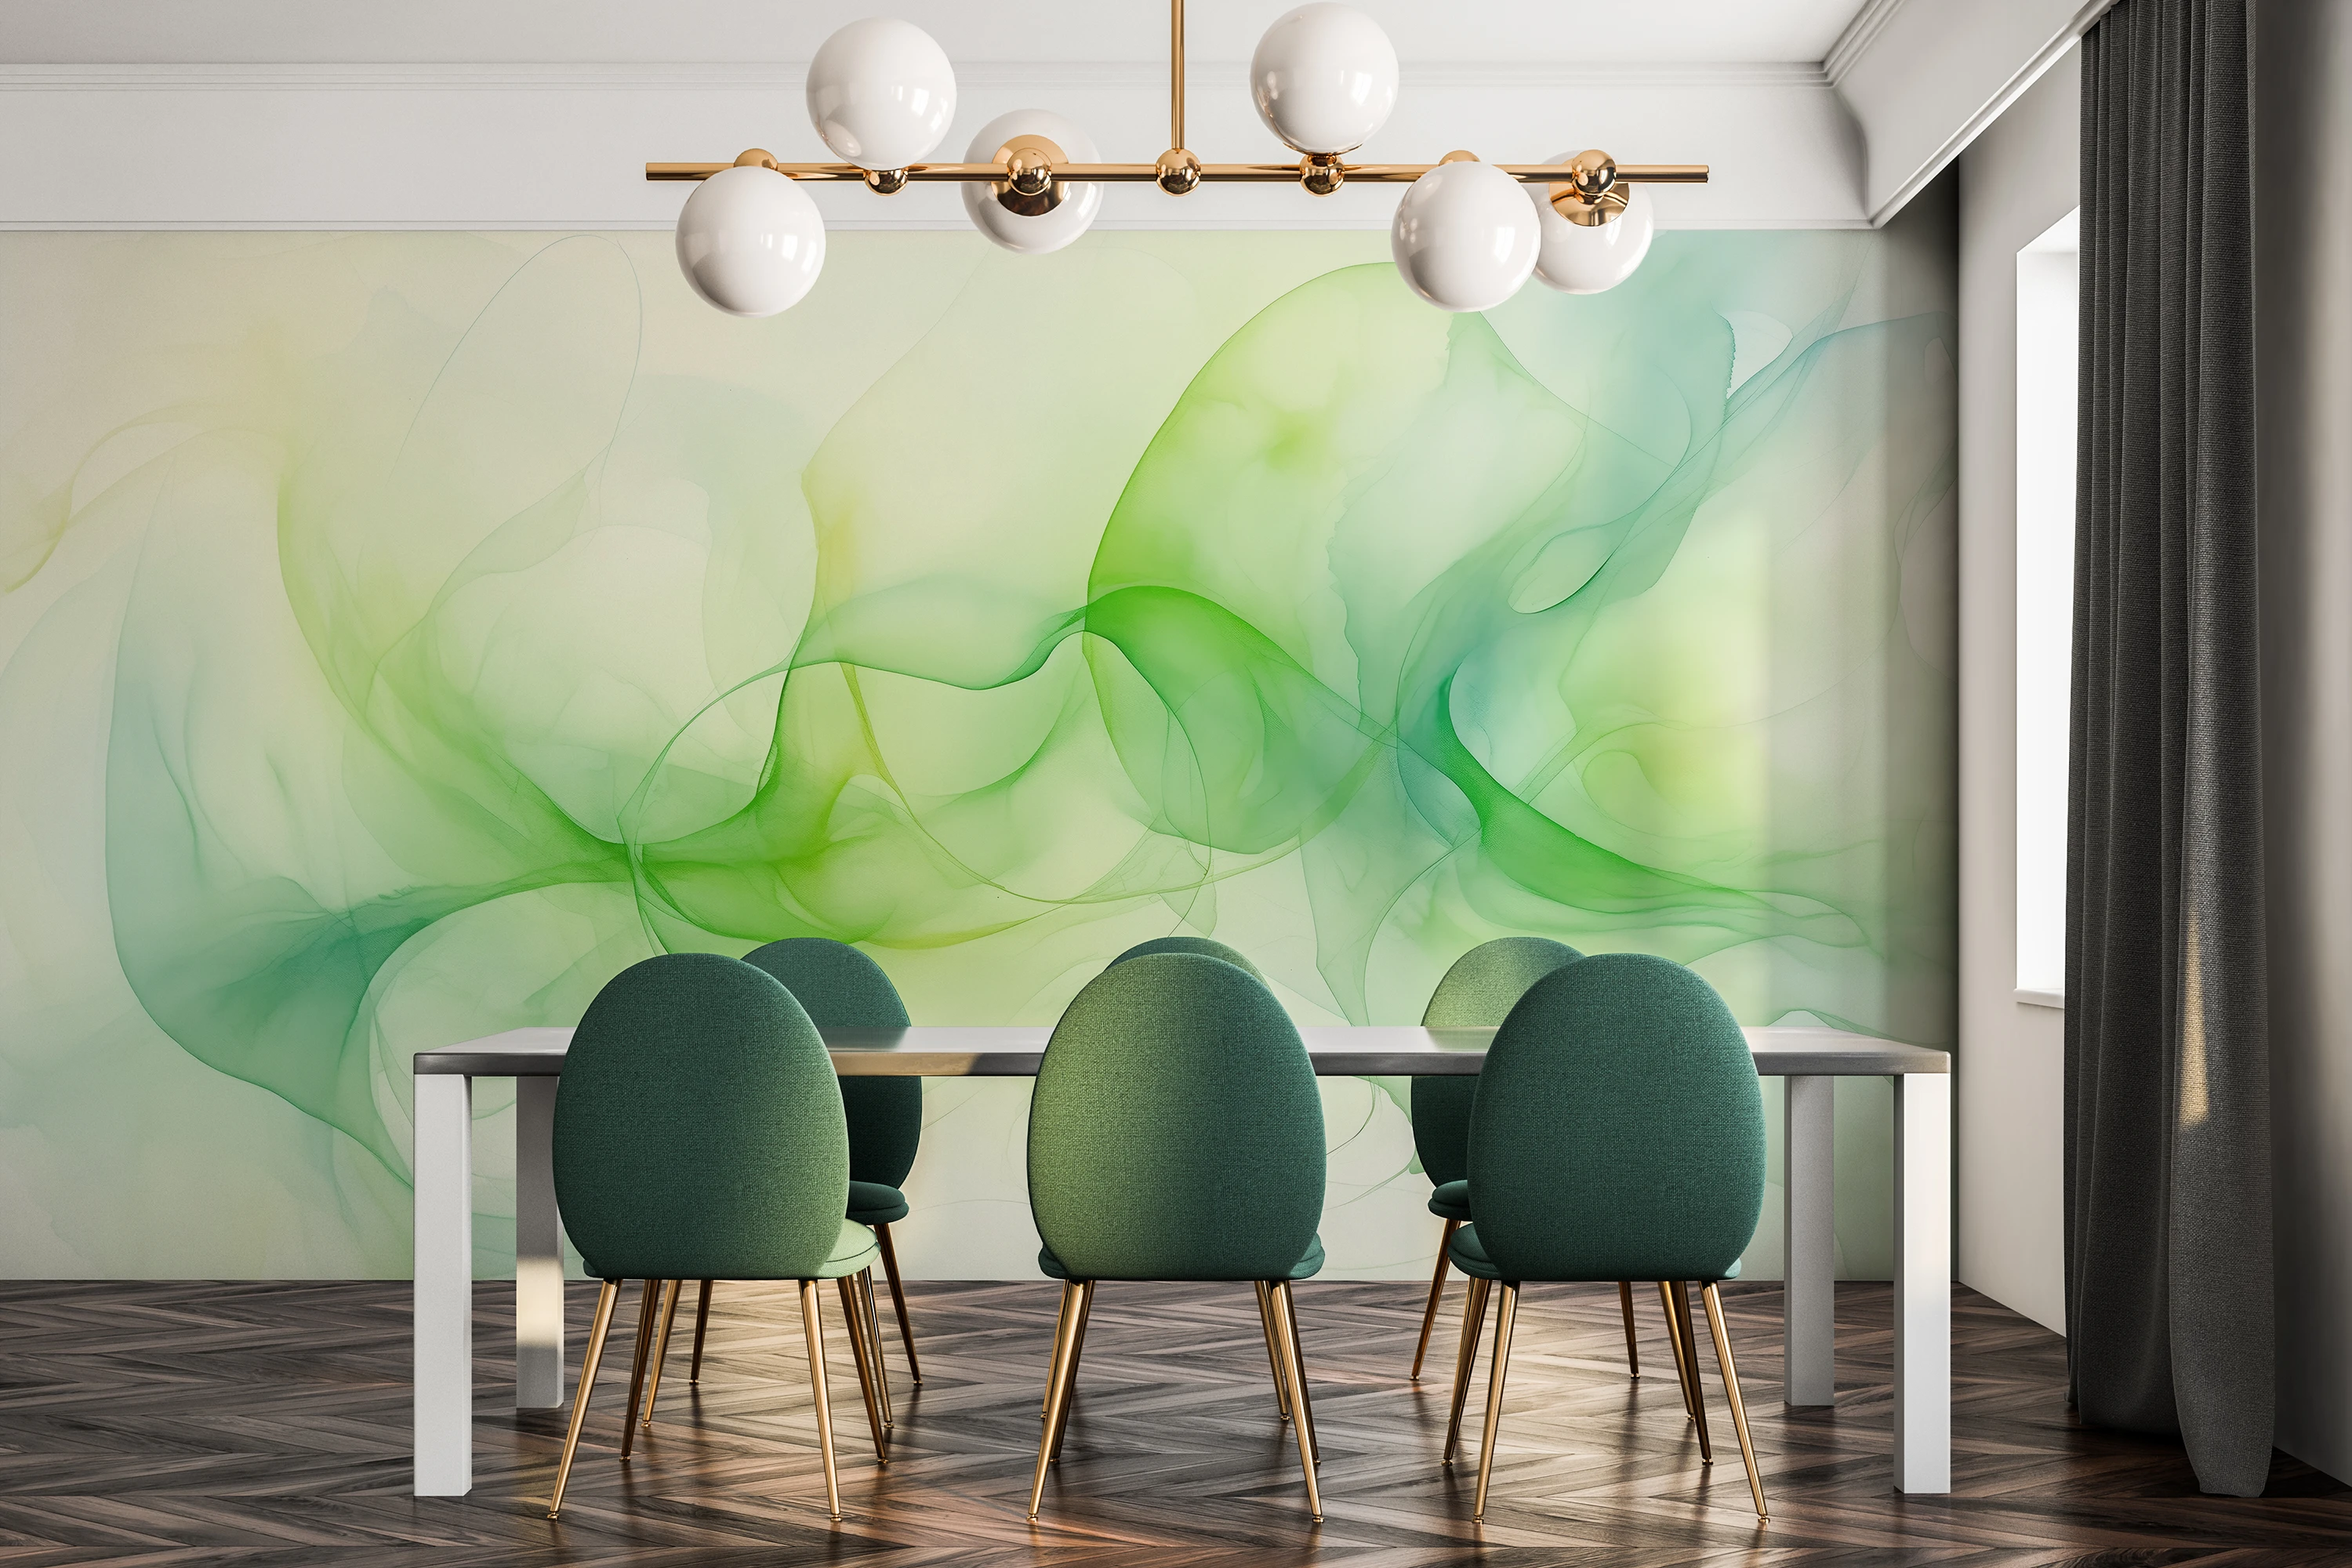 An abstract pattern resembling light, organic forms in vivid shades of green, perfect for relaxation spaces or creative studios.